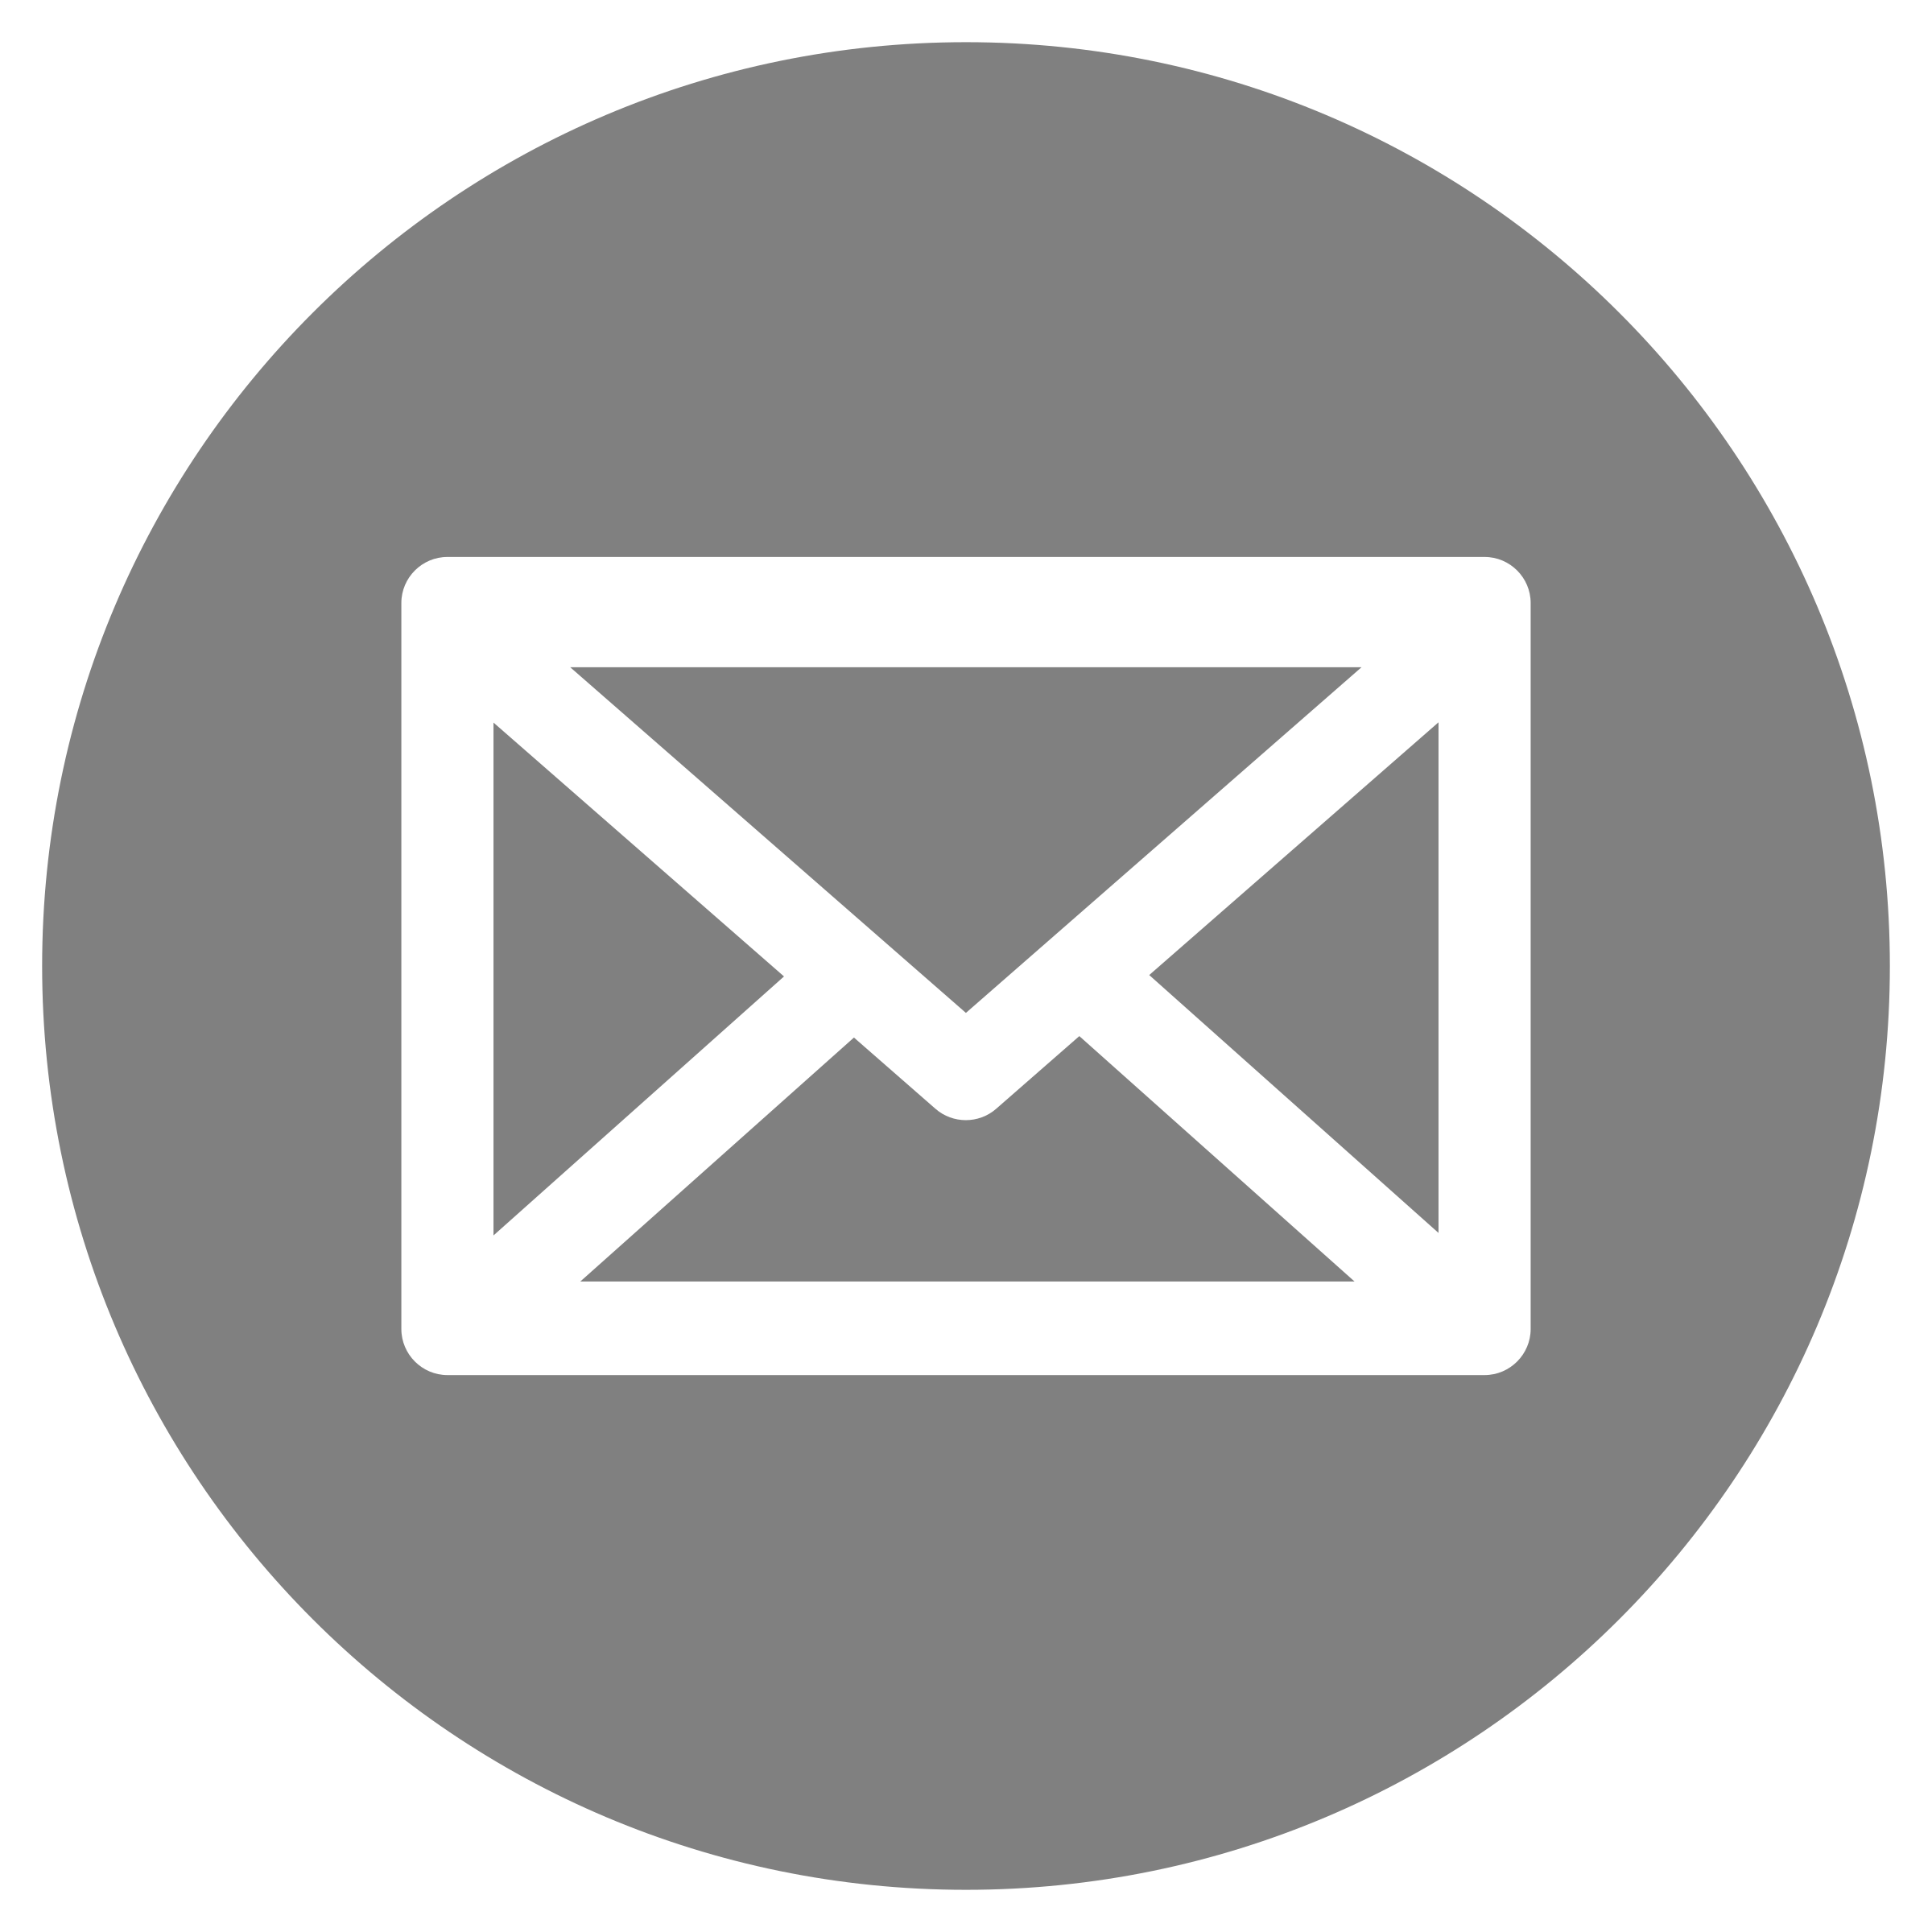 Phone clipart email address. Mail icon white on